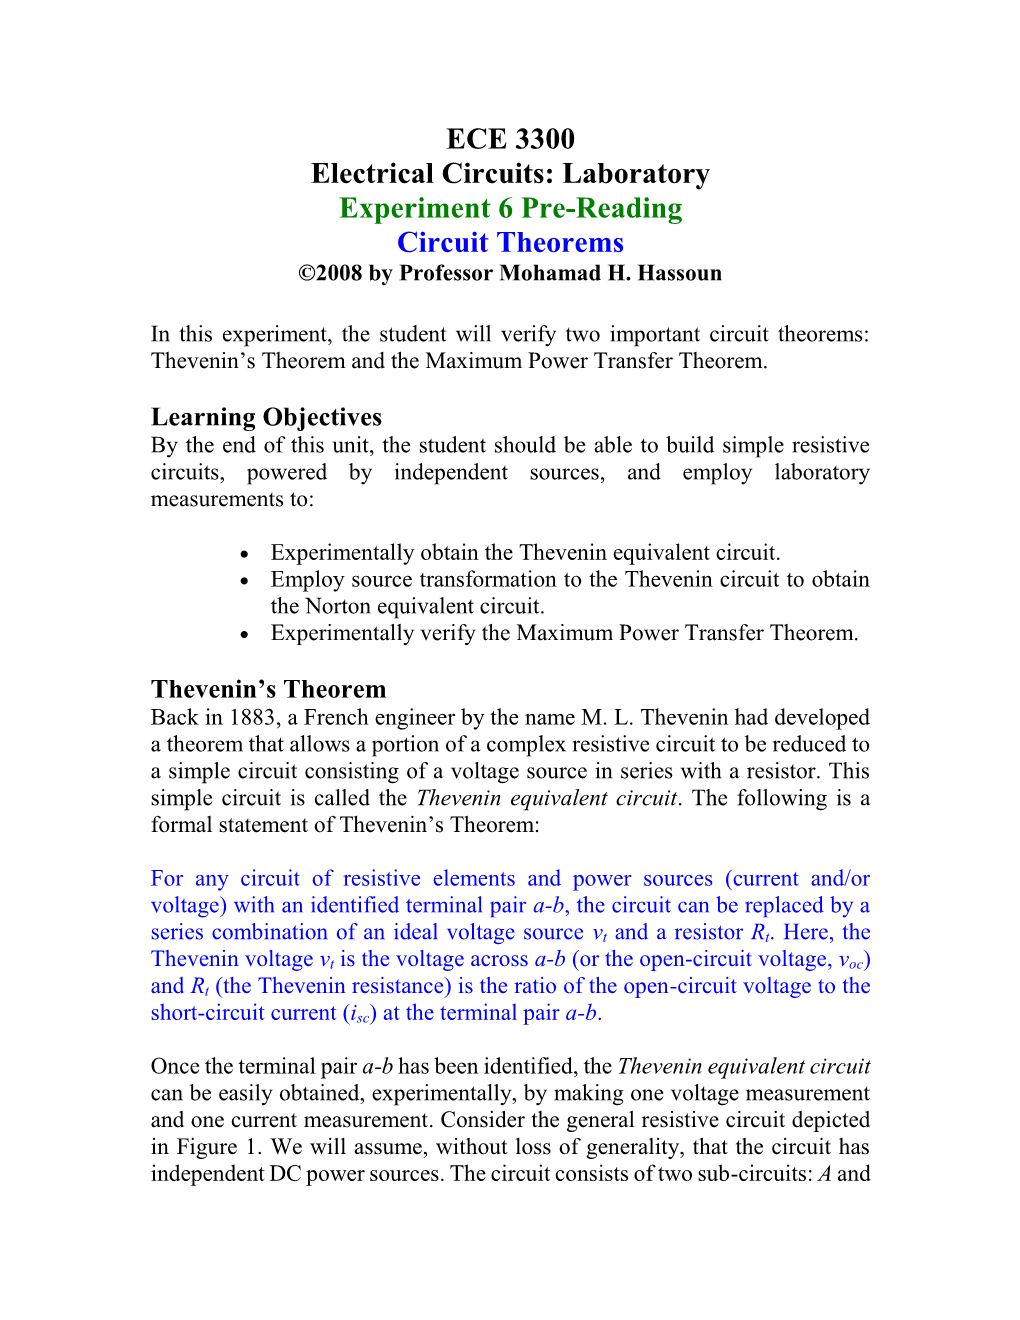 Laboratory Experiment 6 Pre-Reading Circuit Theorems ©2008 by Professor Mohamad H